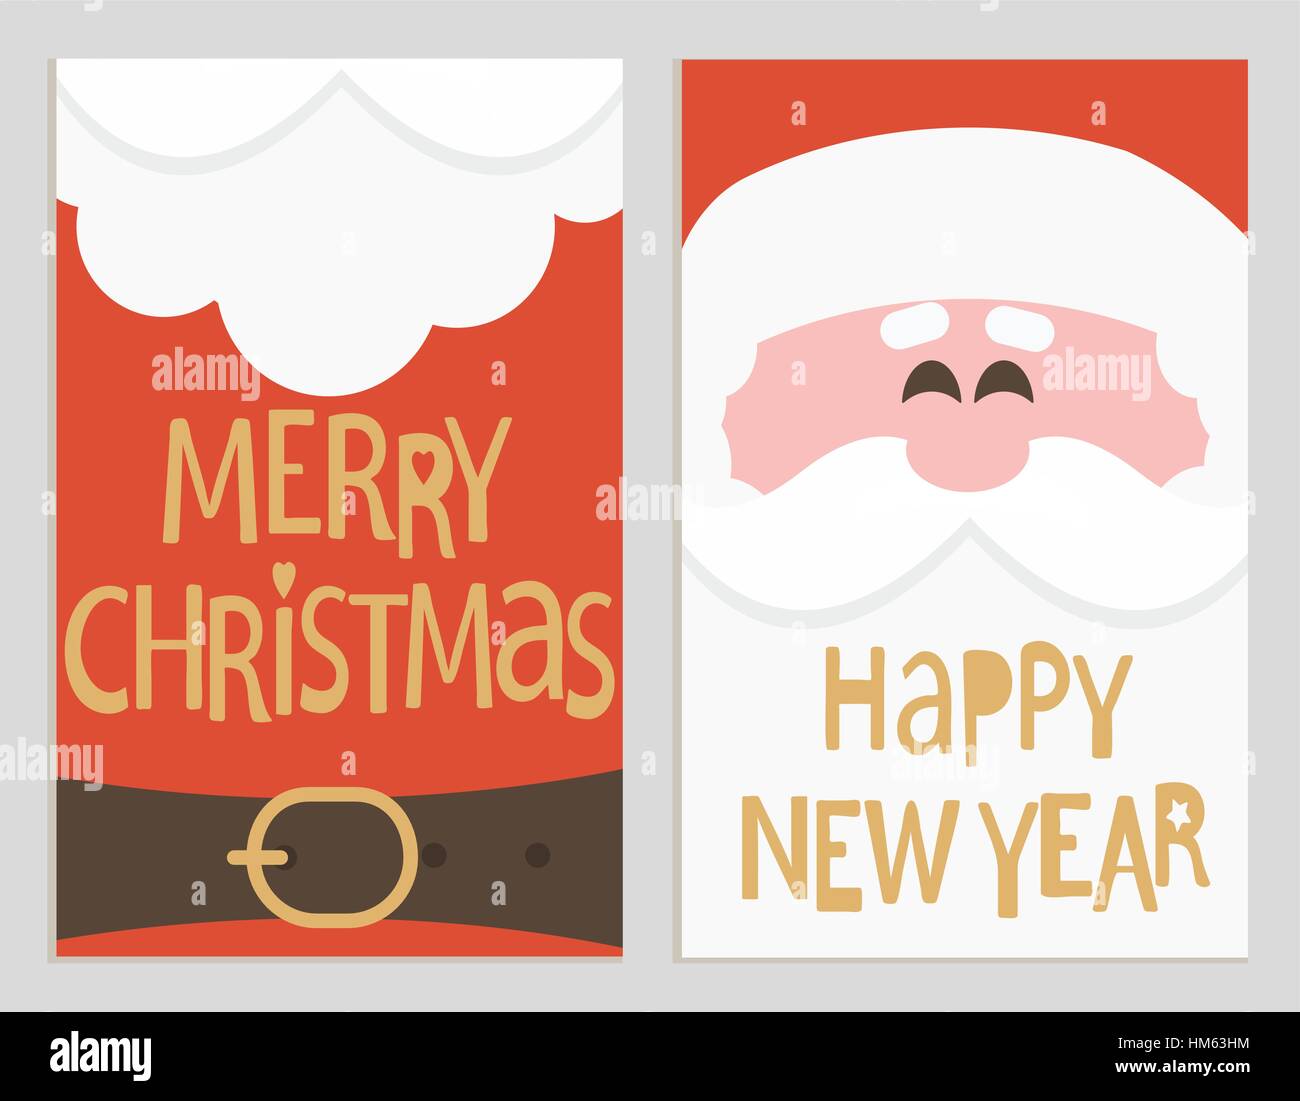 Santa's message banners. Merry Christmas and happy new year lettering. Vector illustration. Stock Vector